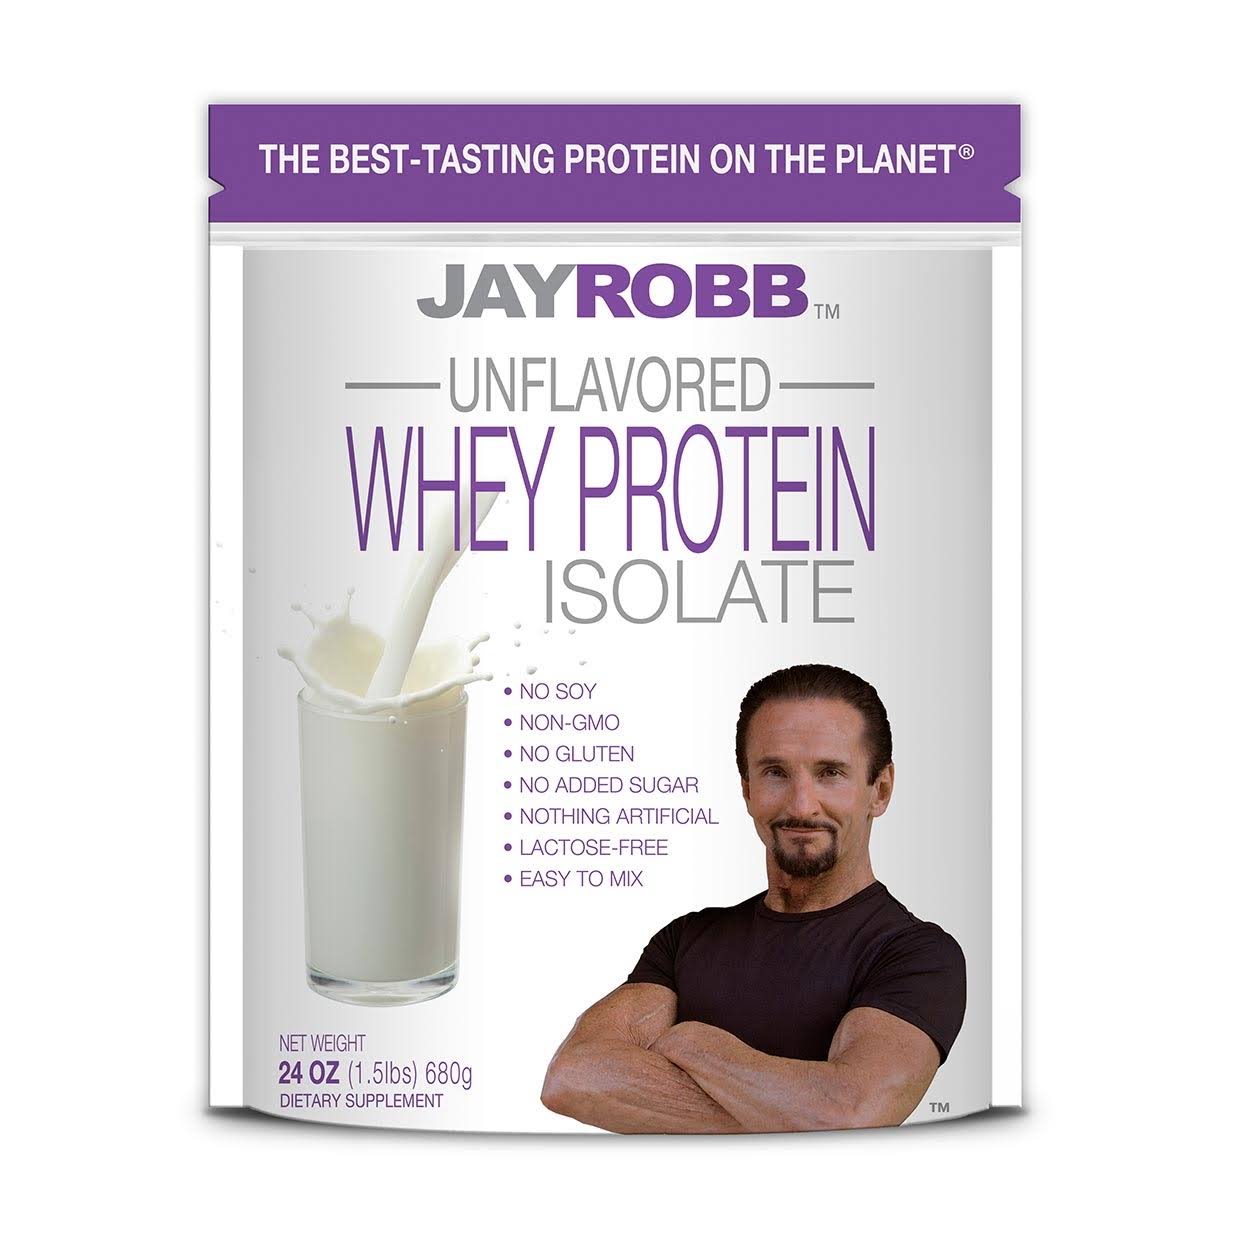 Jay Robb Whey Protein Isolate Supplement - 24oz